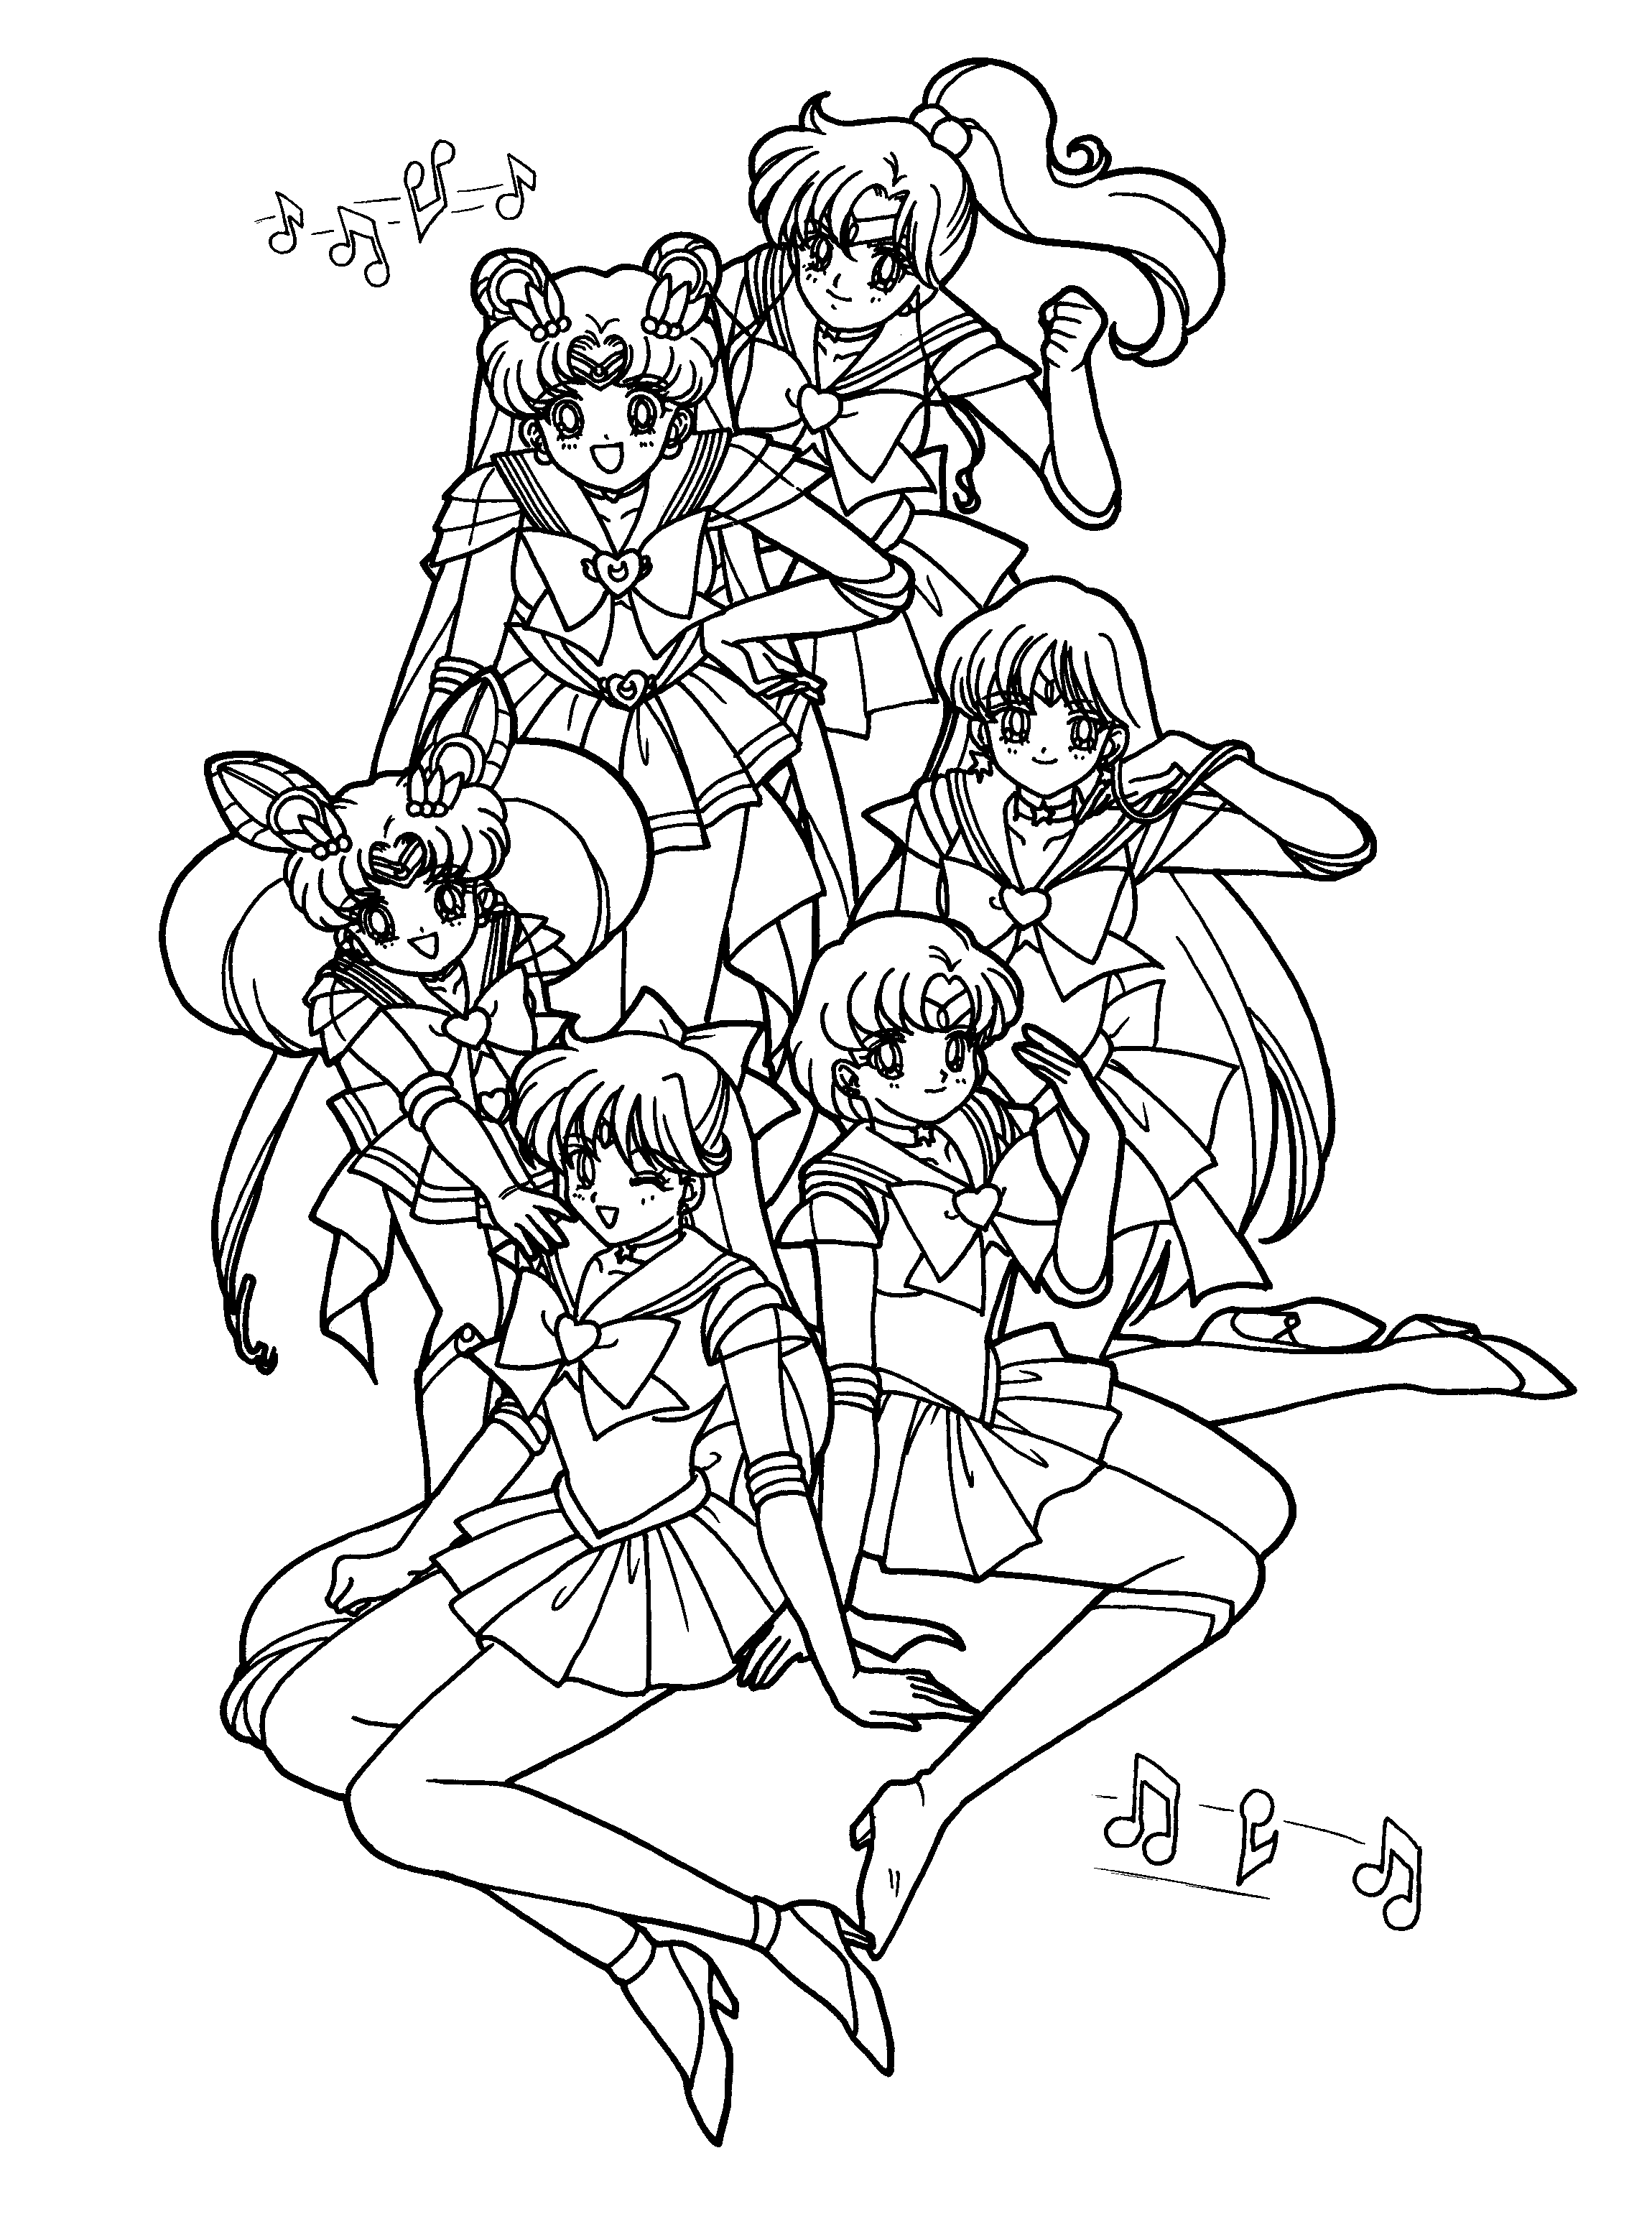 sailor moon all sailor scouts coloring pages - photo #25